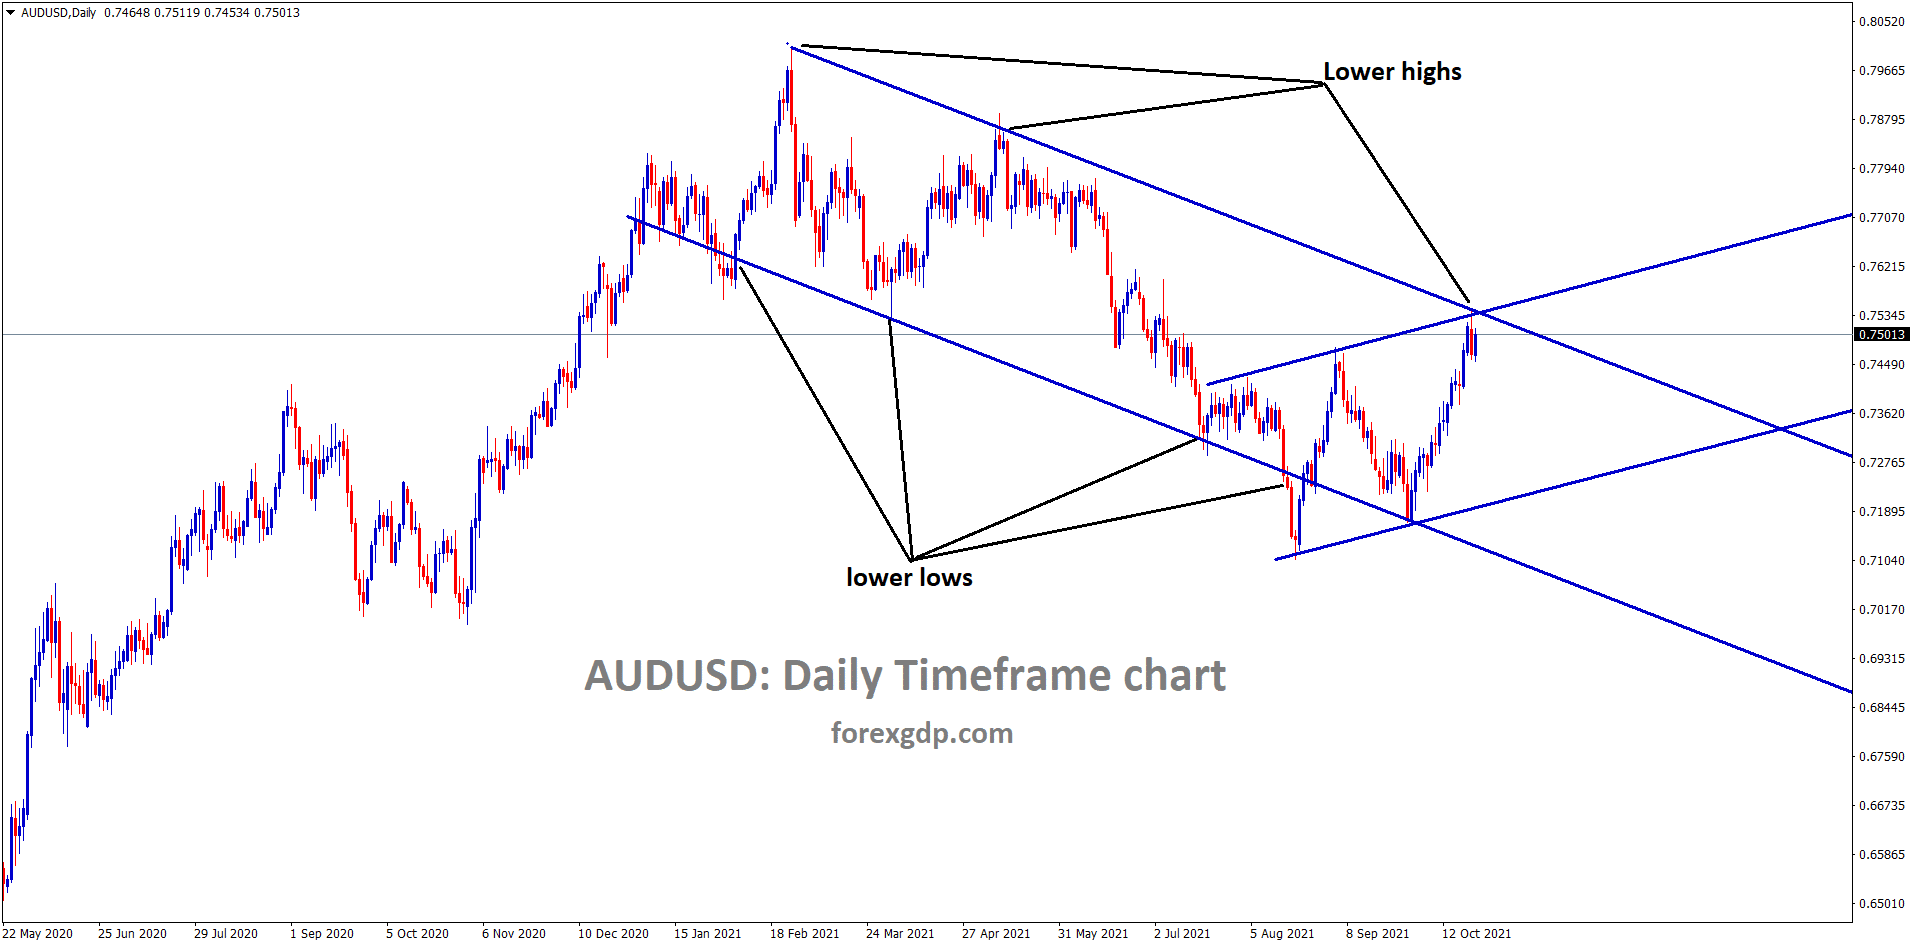 AUDUSD is standing at the higher level of the major descending channel and the minor ascending channel